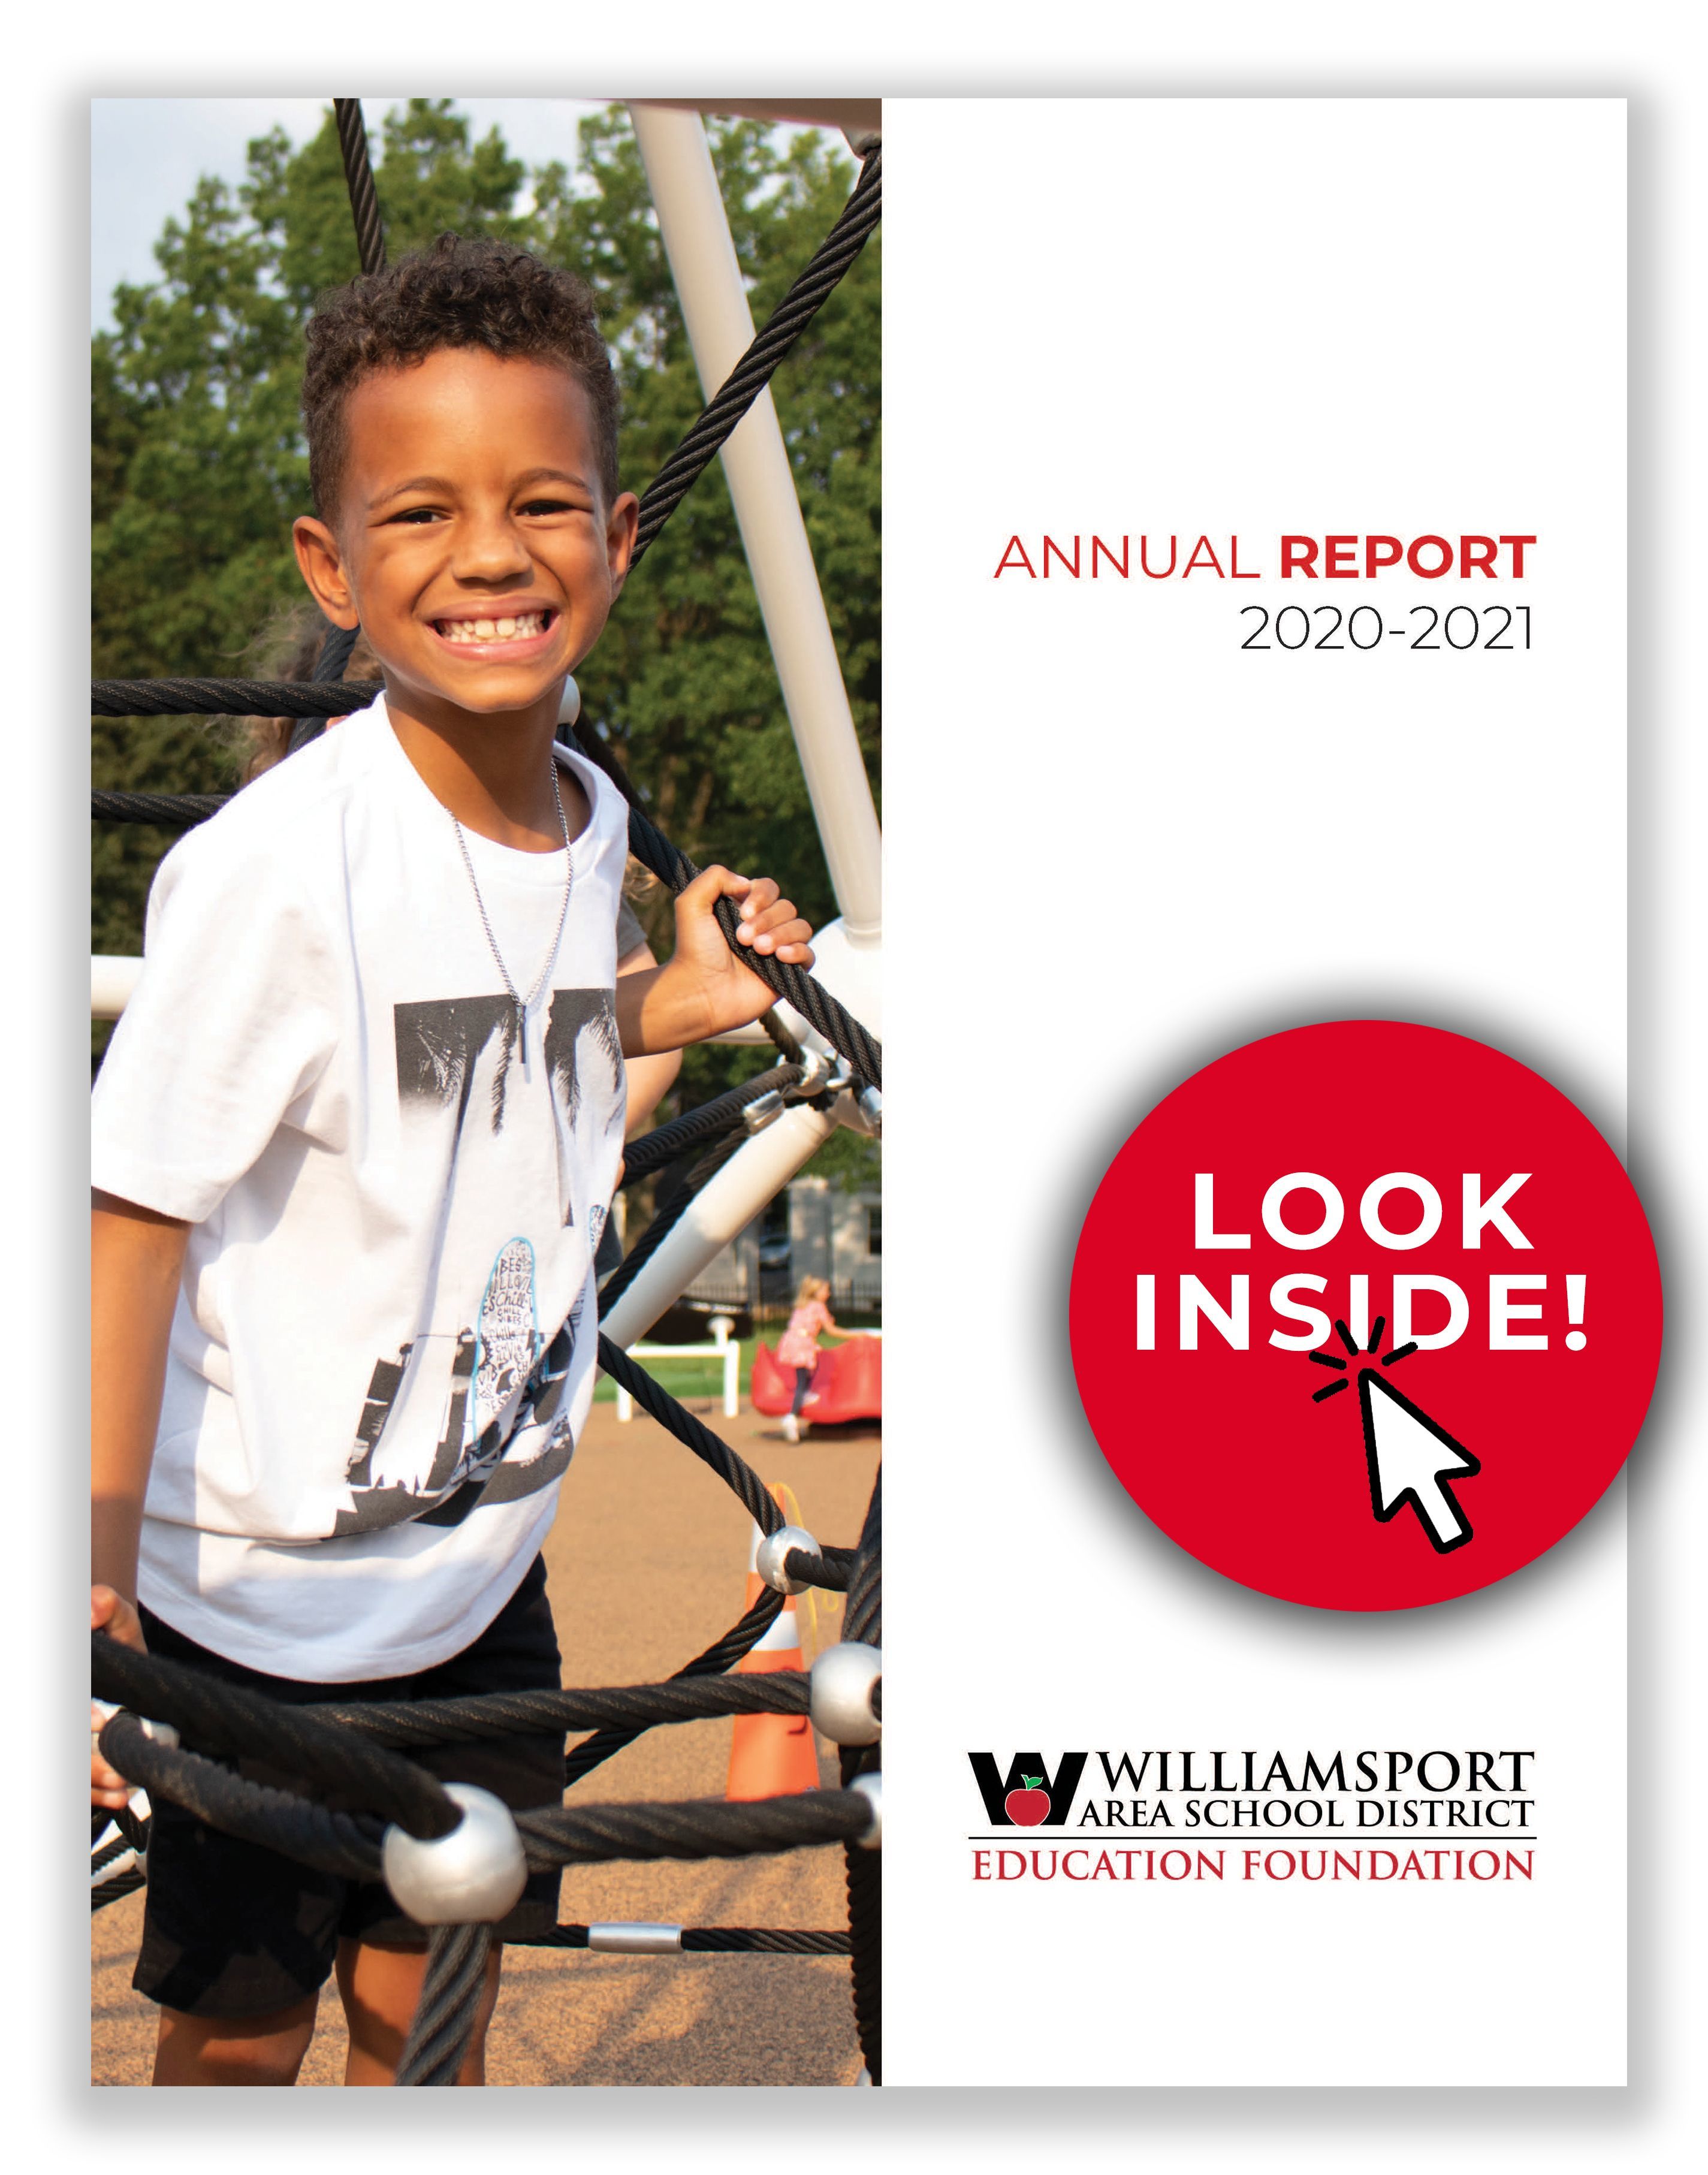 WASD Education Foundation Releases 2020-2021 Annual Report